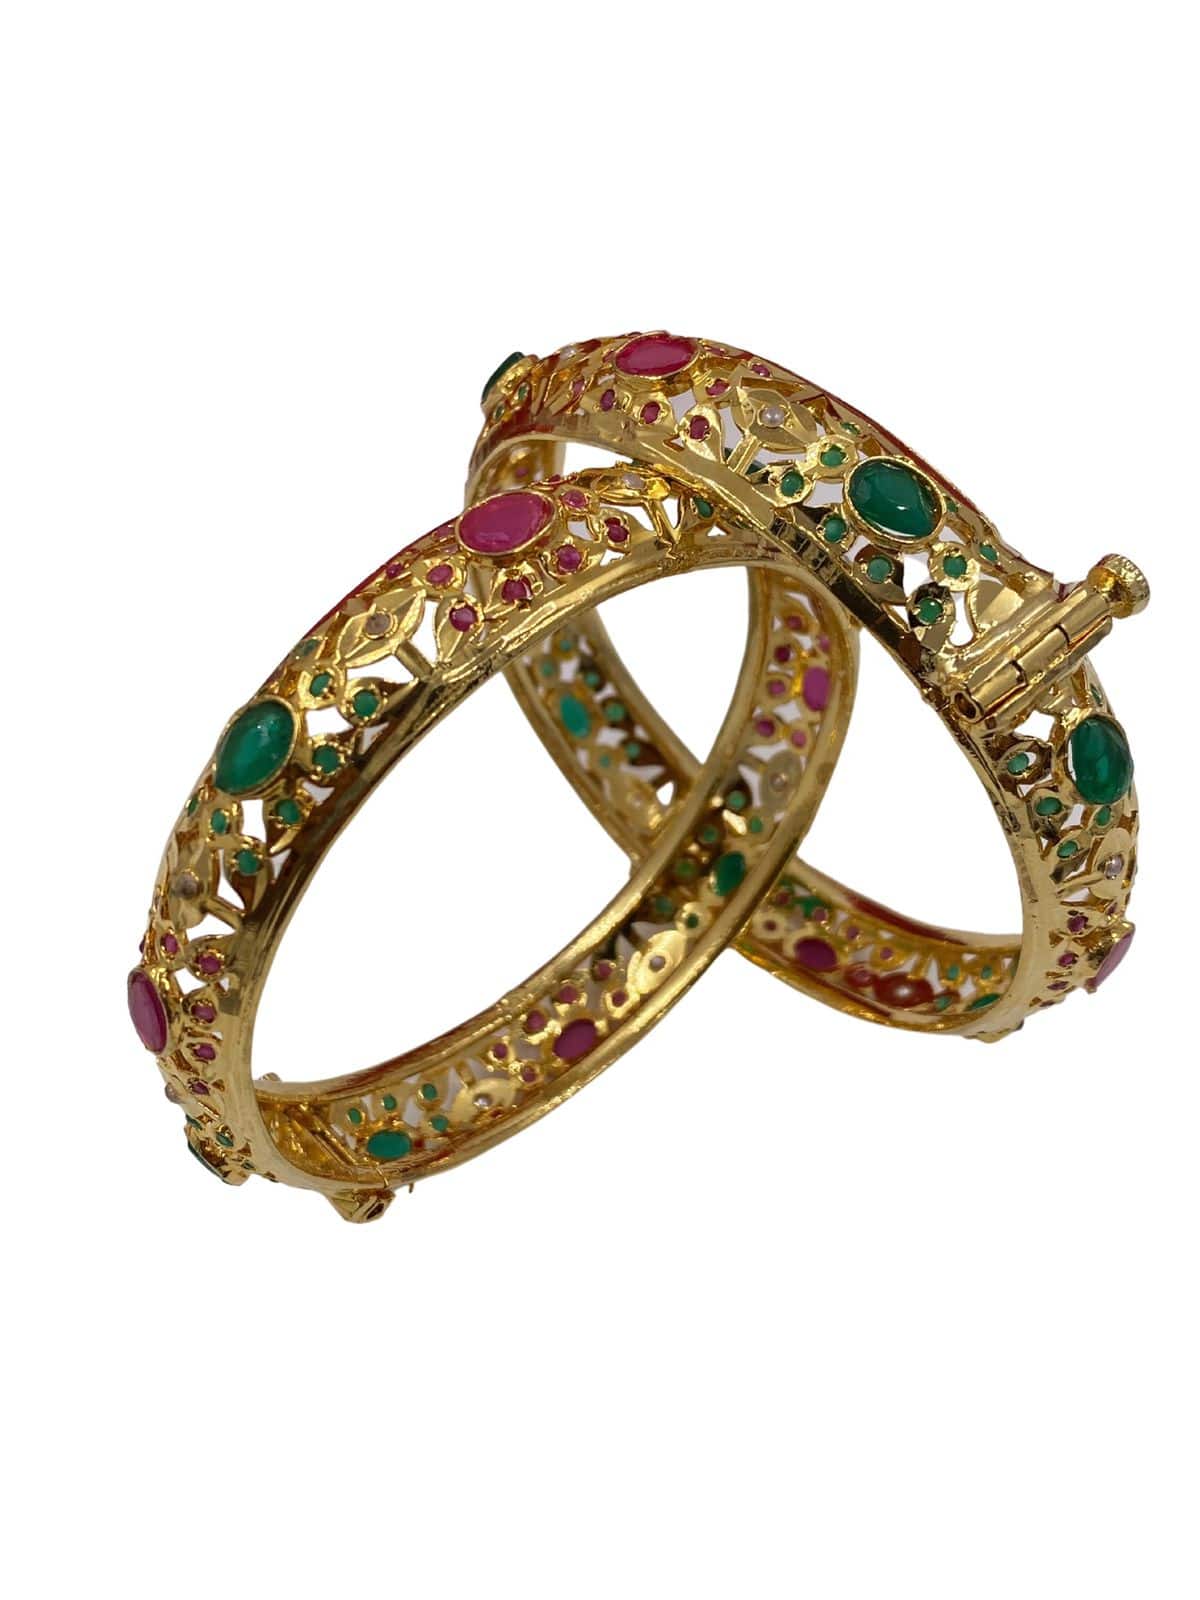 Gold Plated Multi Color Jadau Bangle Set Handcrafted With Real Stones For Women Antique Golden Bangles